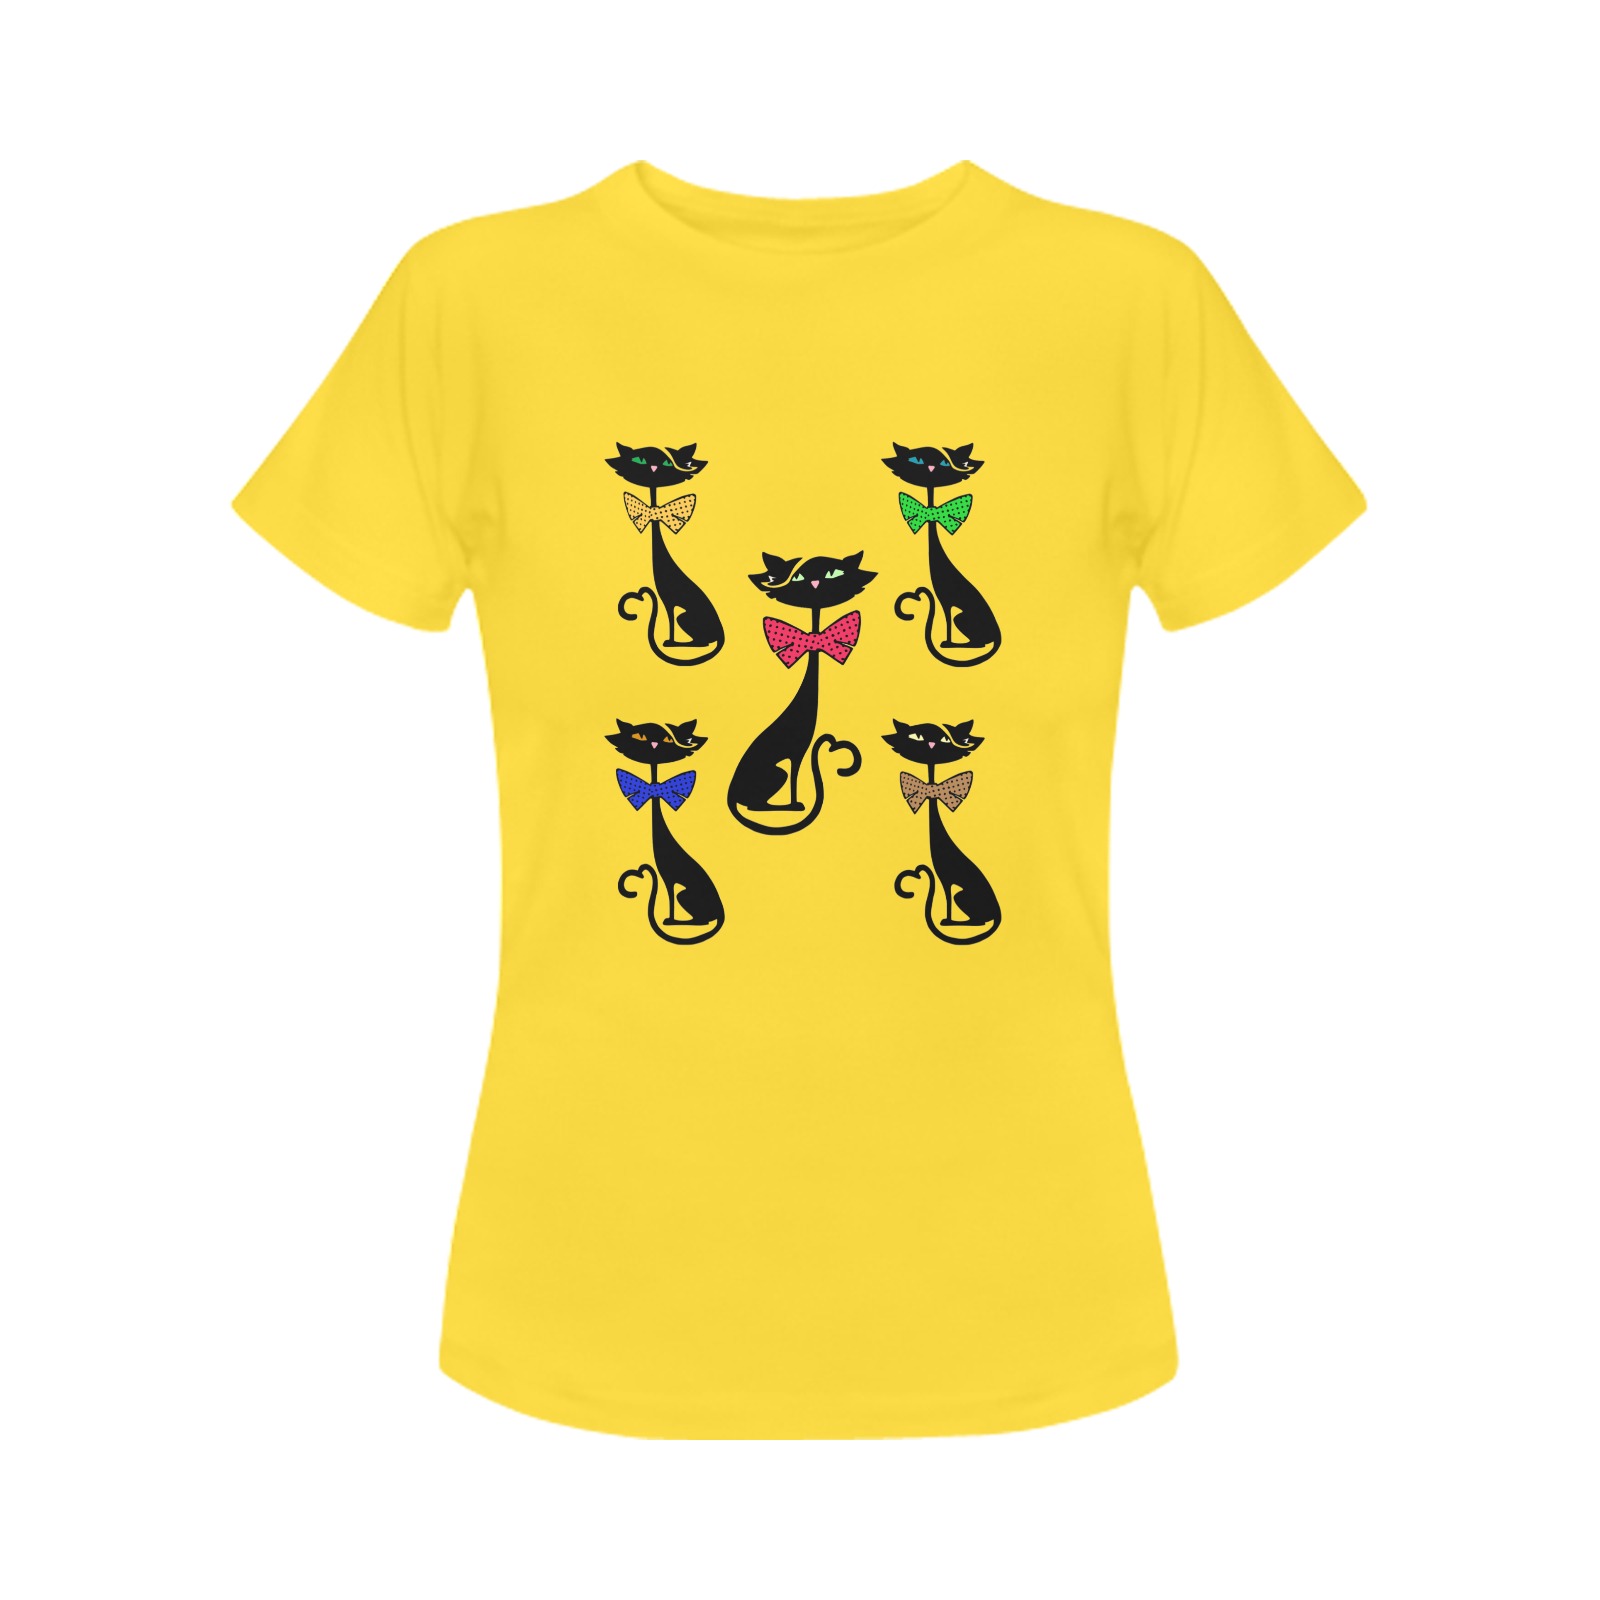 Black Cat with Bow Ties - Yellow Women's T-Shirt in USA Size (Front Printing Only)